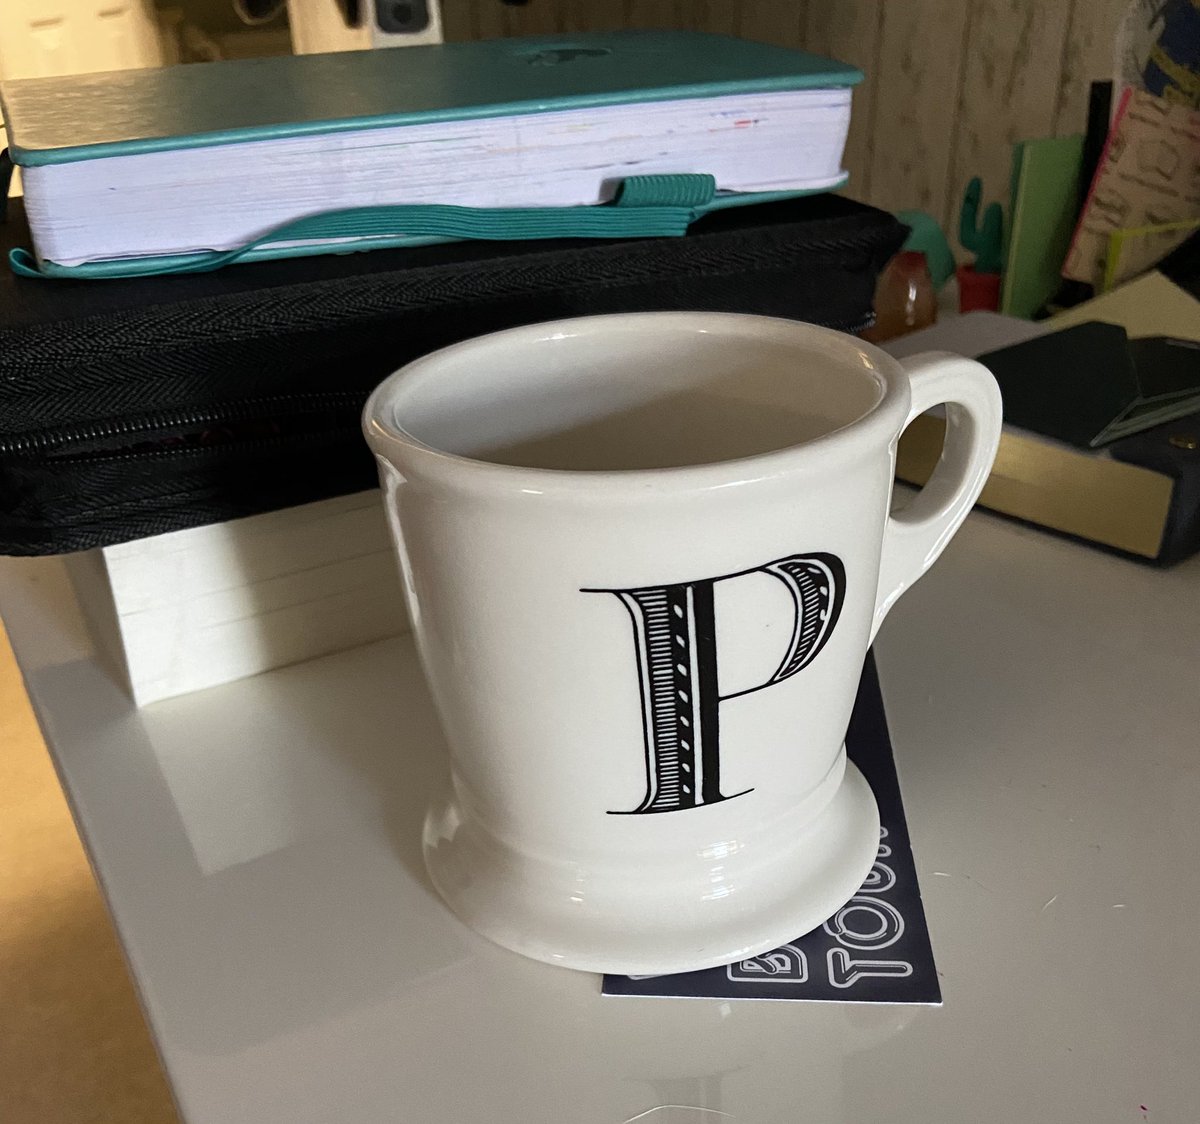 RT @Penny_Zang: If you don’t have abandoned coffee and tea mugs on every surface, are you even a writer? https://t.co/XcXaoa4cDh